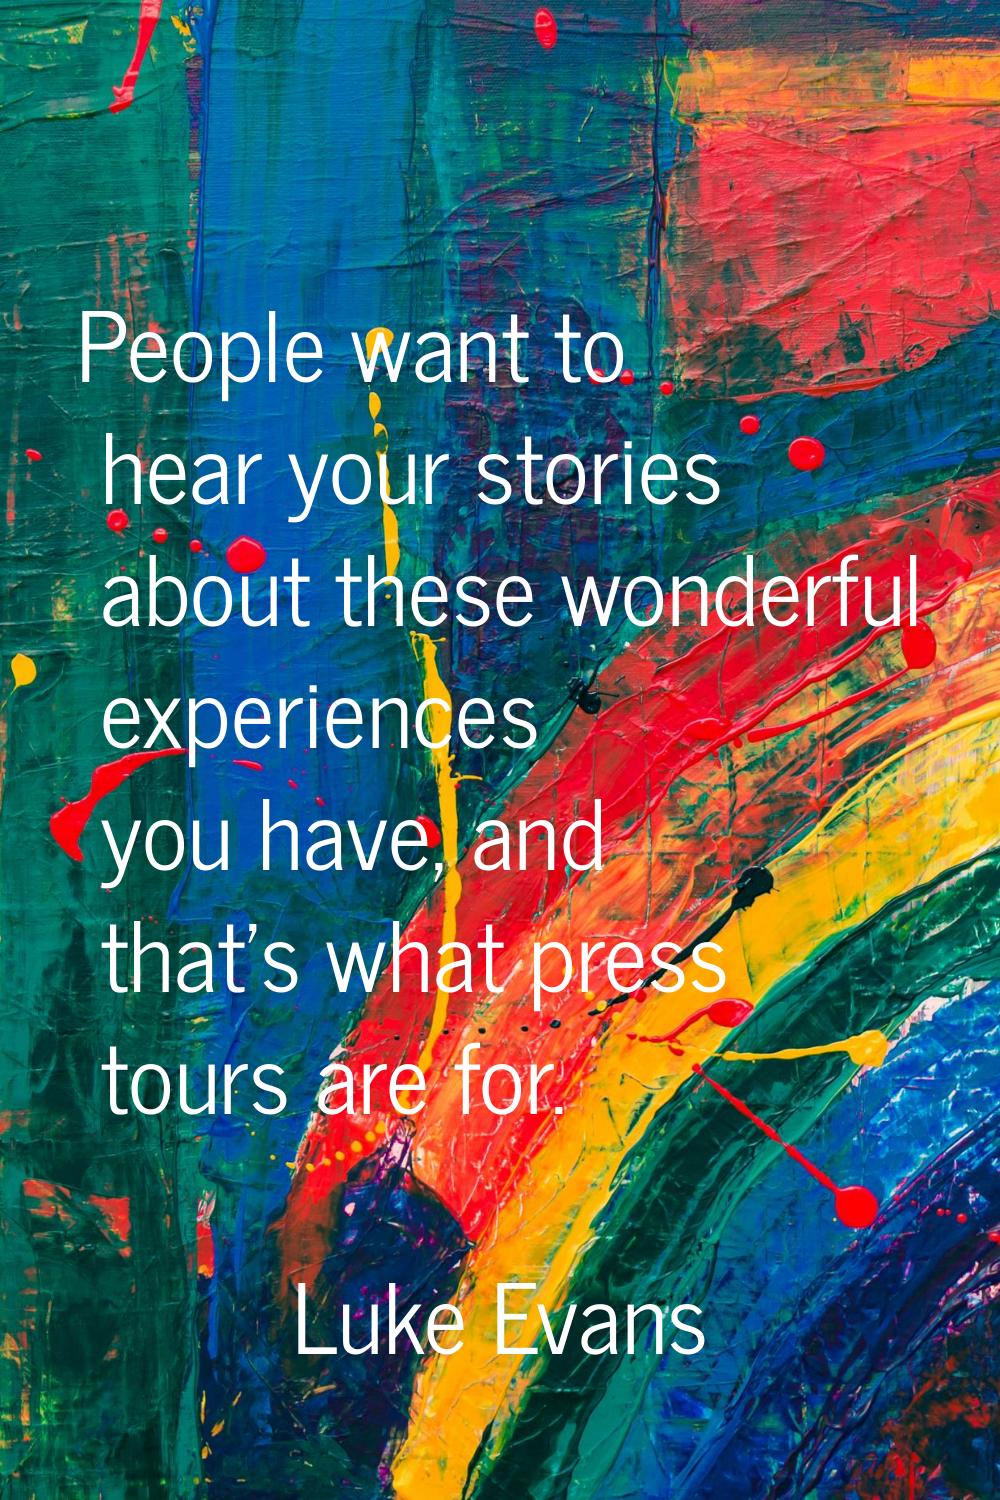 People want to hear your stories about these wonderful experiences you have, and that's what press 